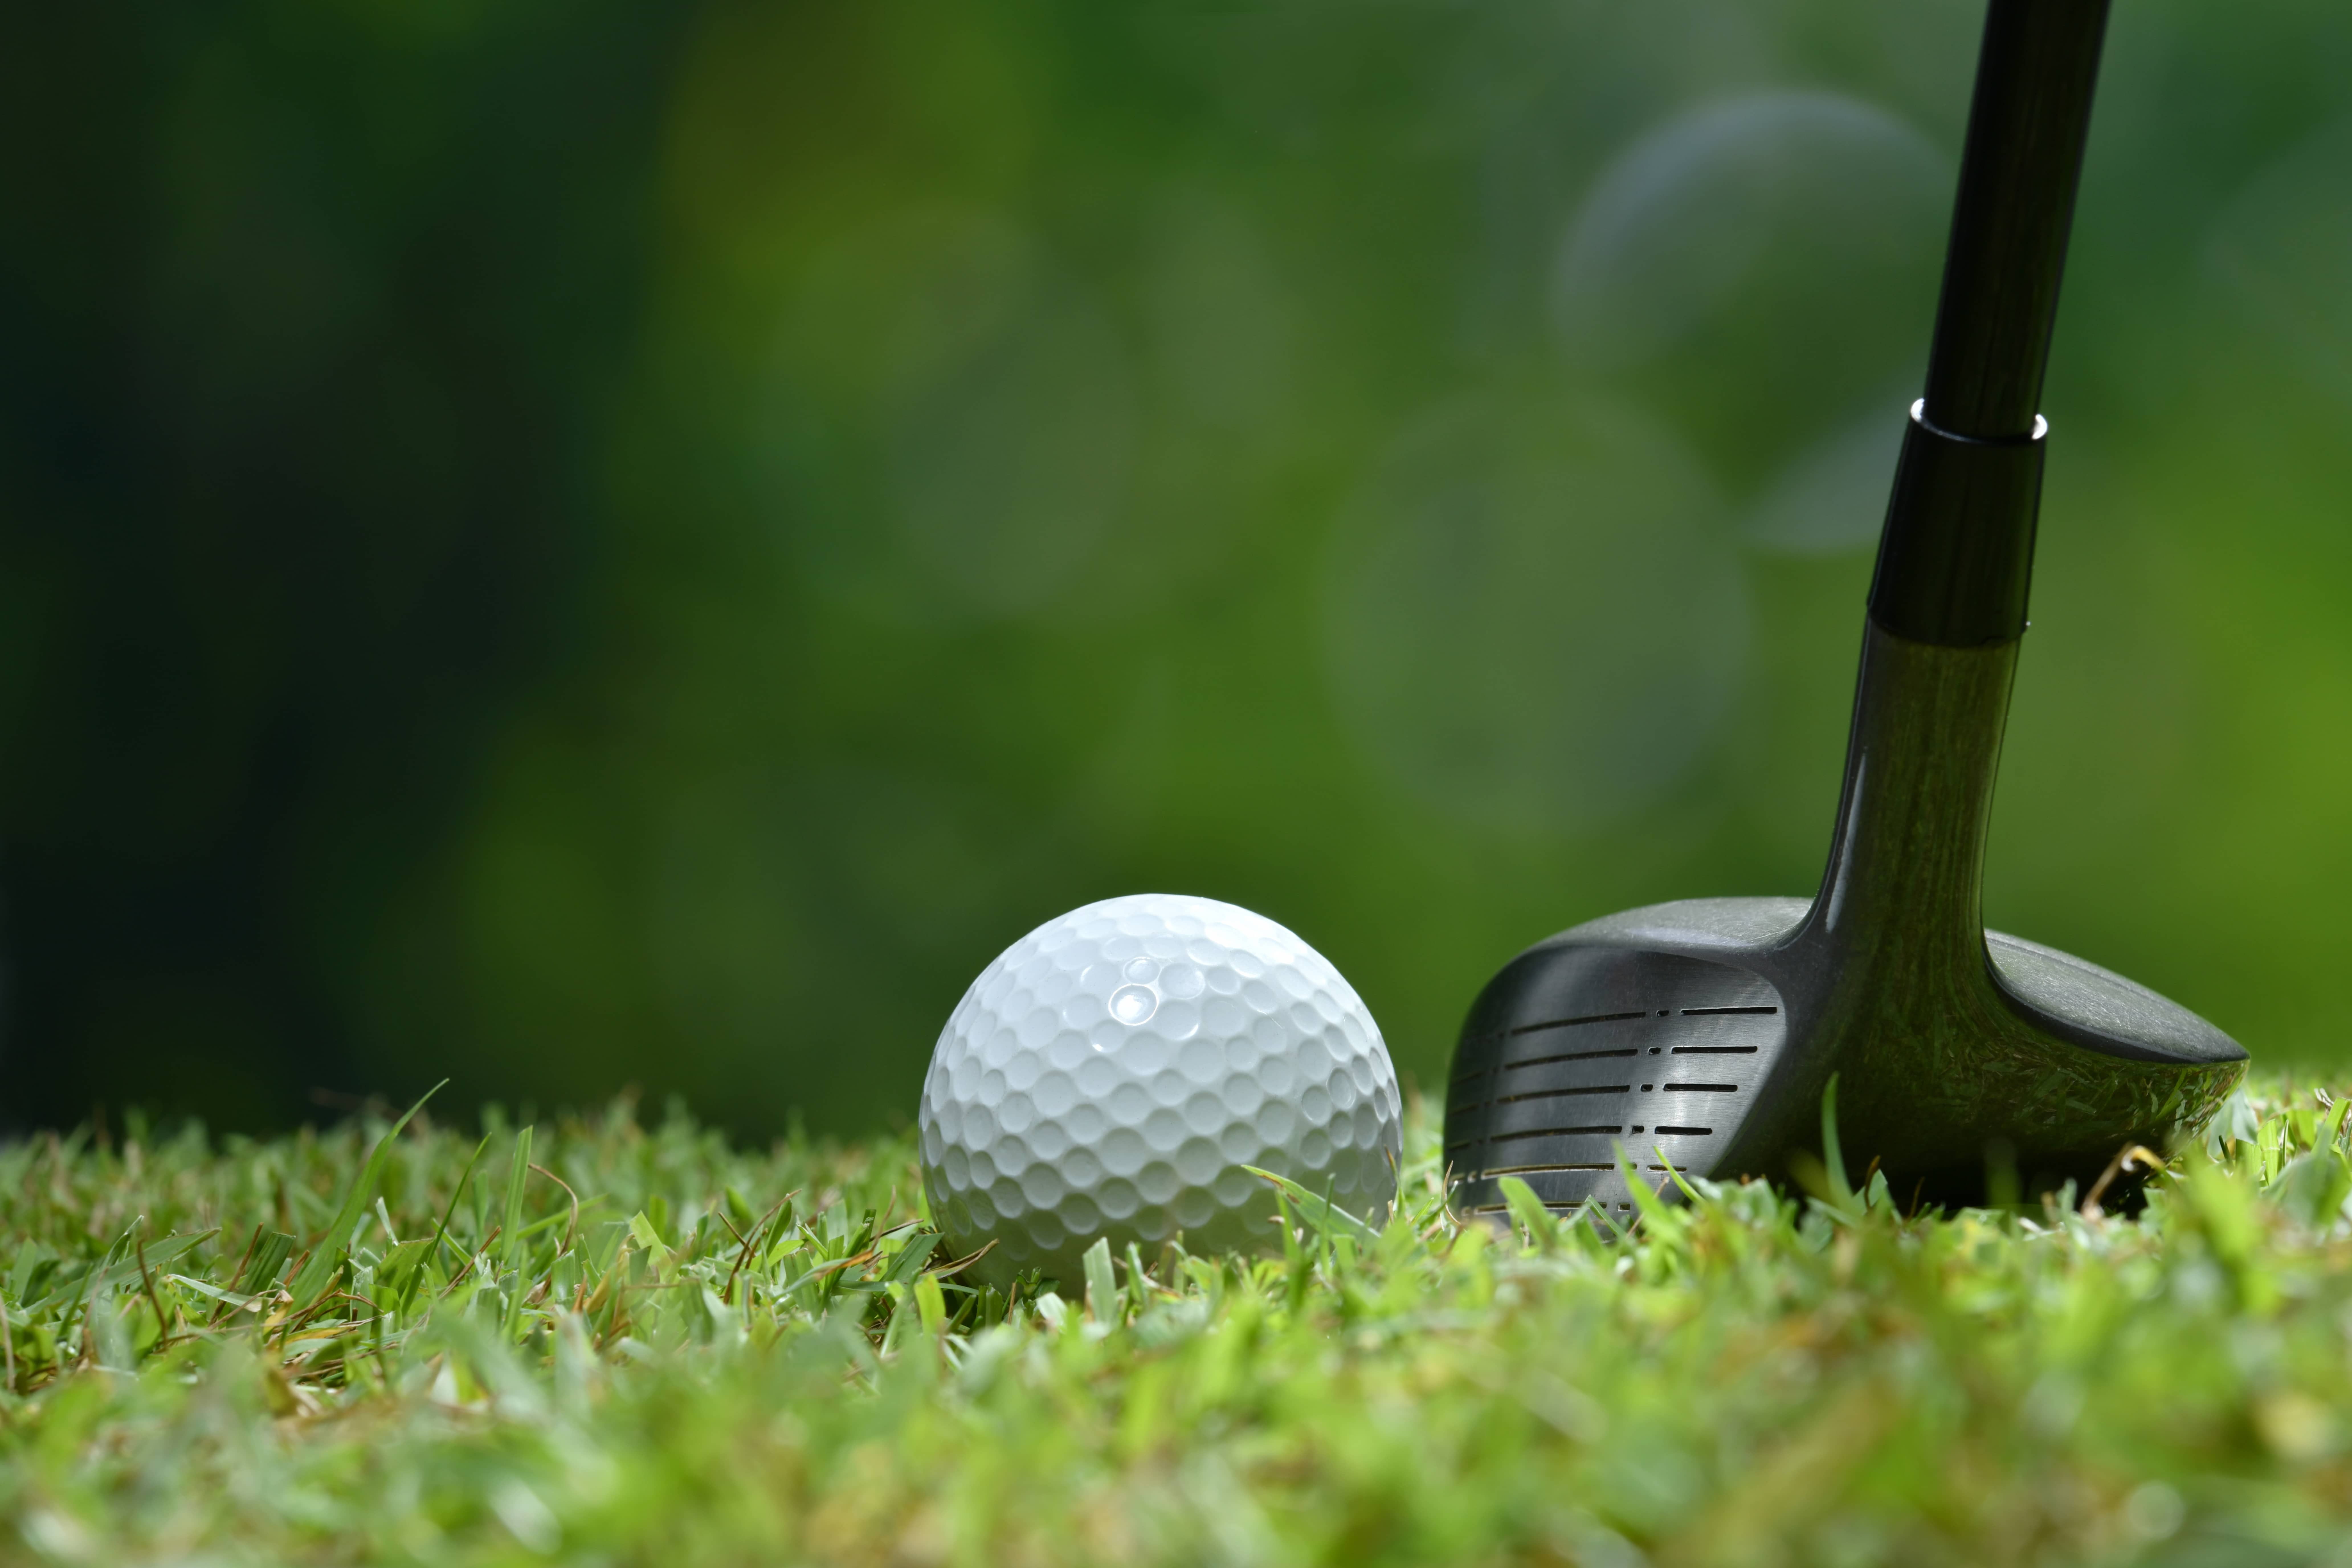 golf-ball-on-green-grass-ready-to-be-struck-on-golf-course-background